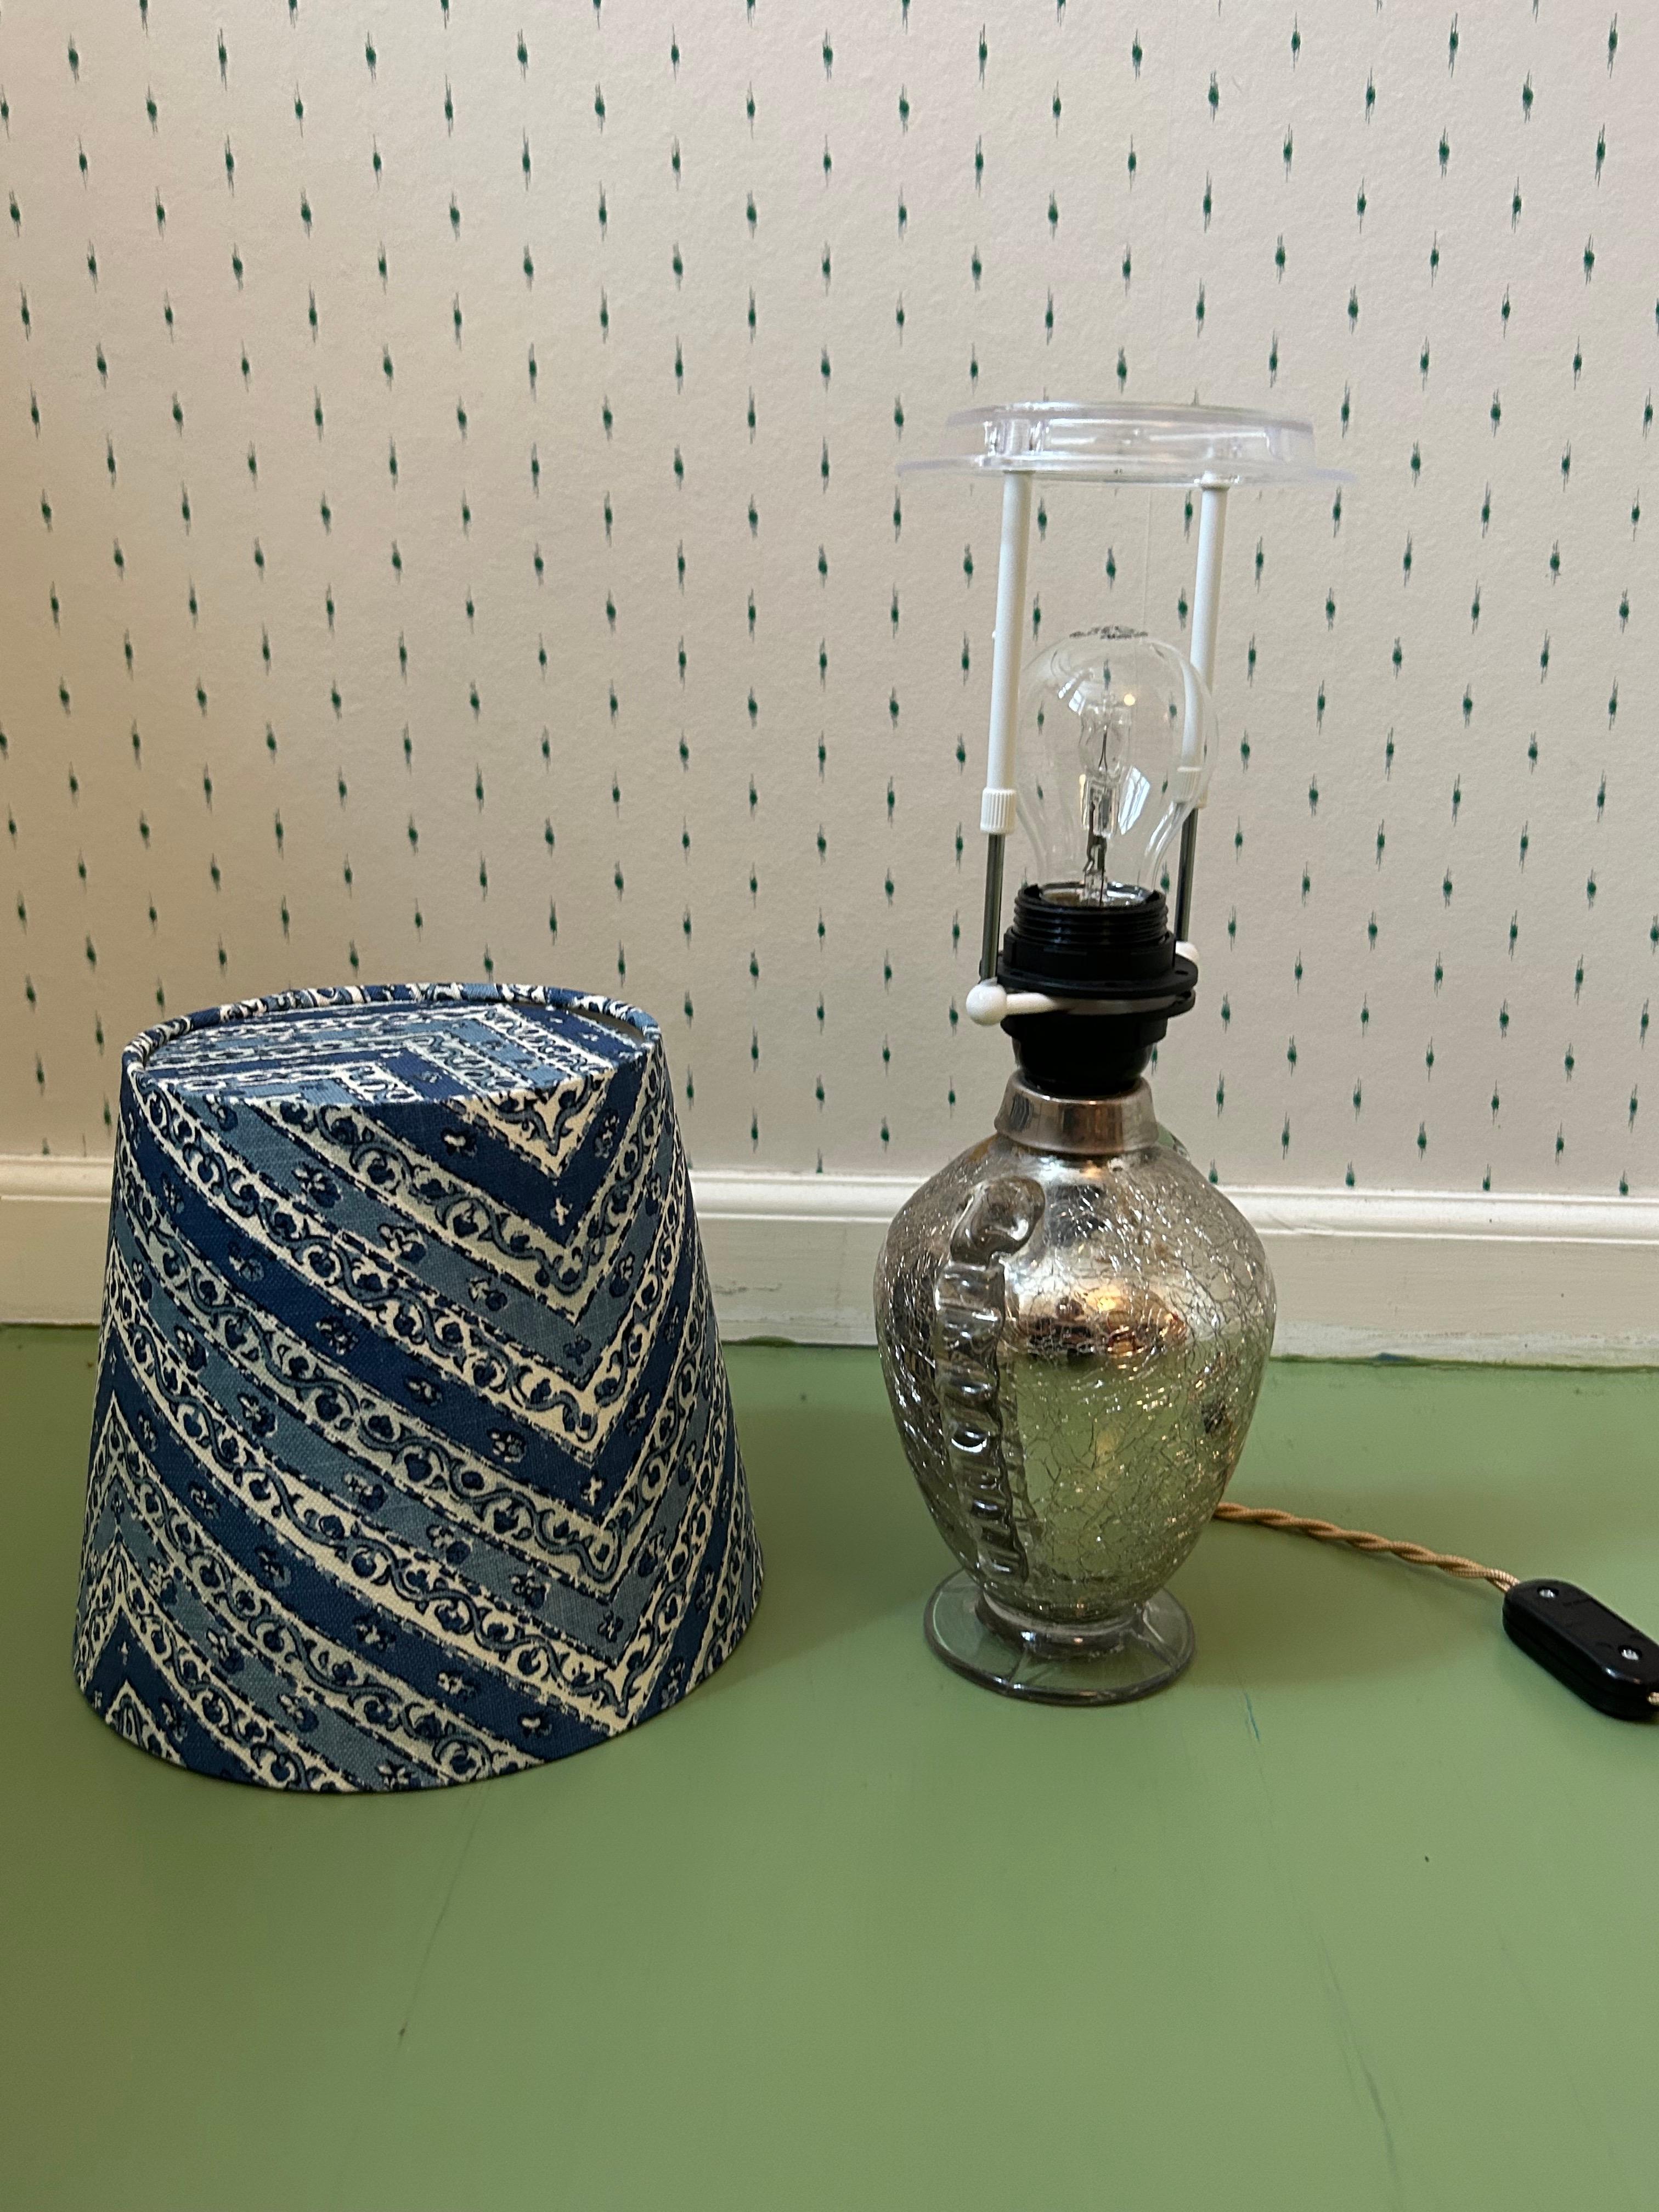 Textile Vintage Table Lamp in Mercury Glass with Customized Shade, Sweden, 20th Century For Sale